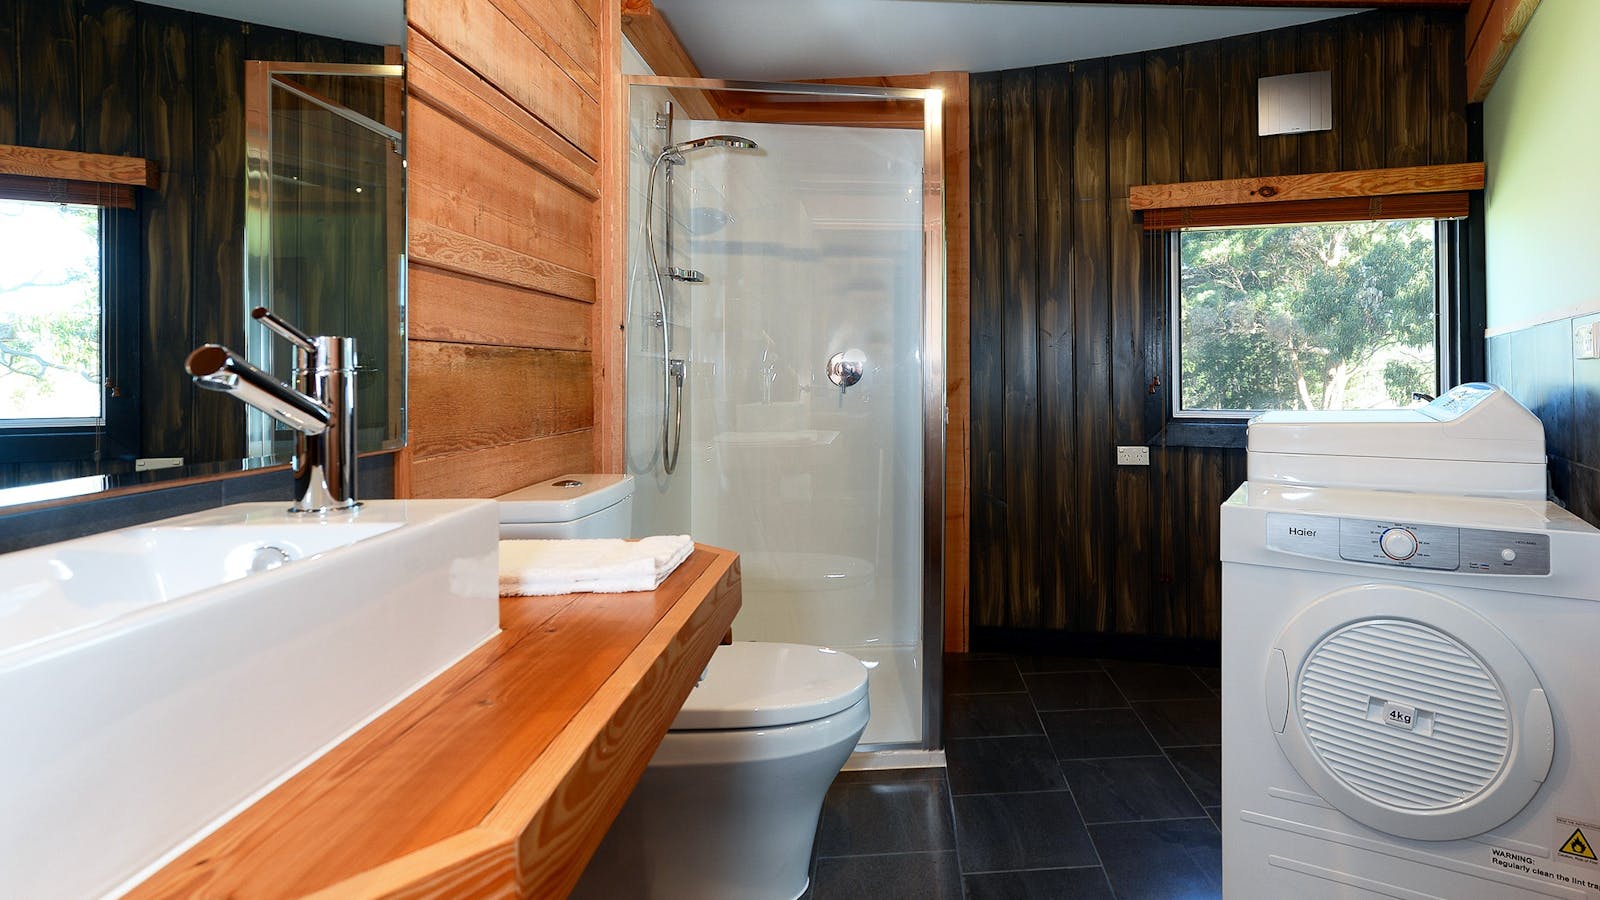 Taylors Bay Cottage:  bathroom and laundry facilities.